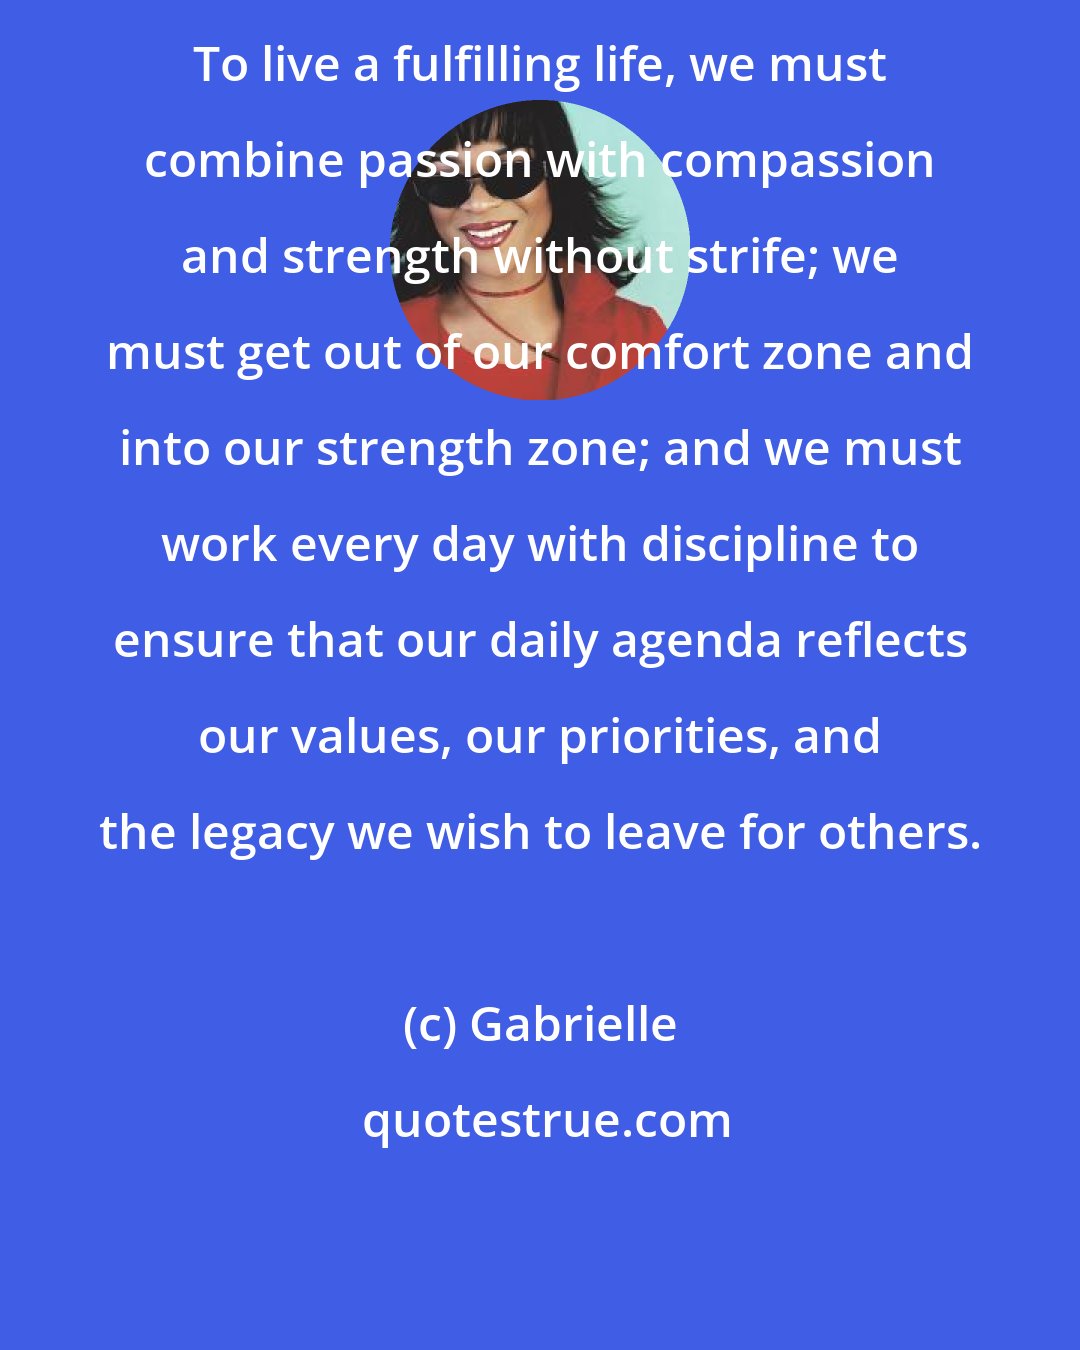 Gabrielle: To live a fulfilling life, we must combine passion with compassion and strength without strife; we must get out of our comfort zone and into our strength zone; and we must work every day with discipline to ensure that our daily agenda reflects our values, our priorities, and the legacy we wish to leave for others.